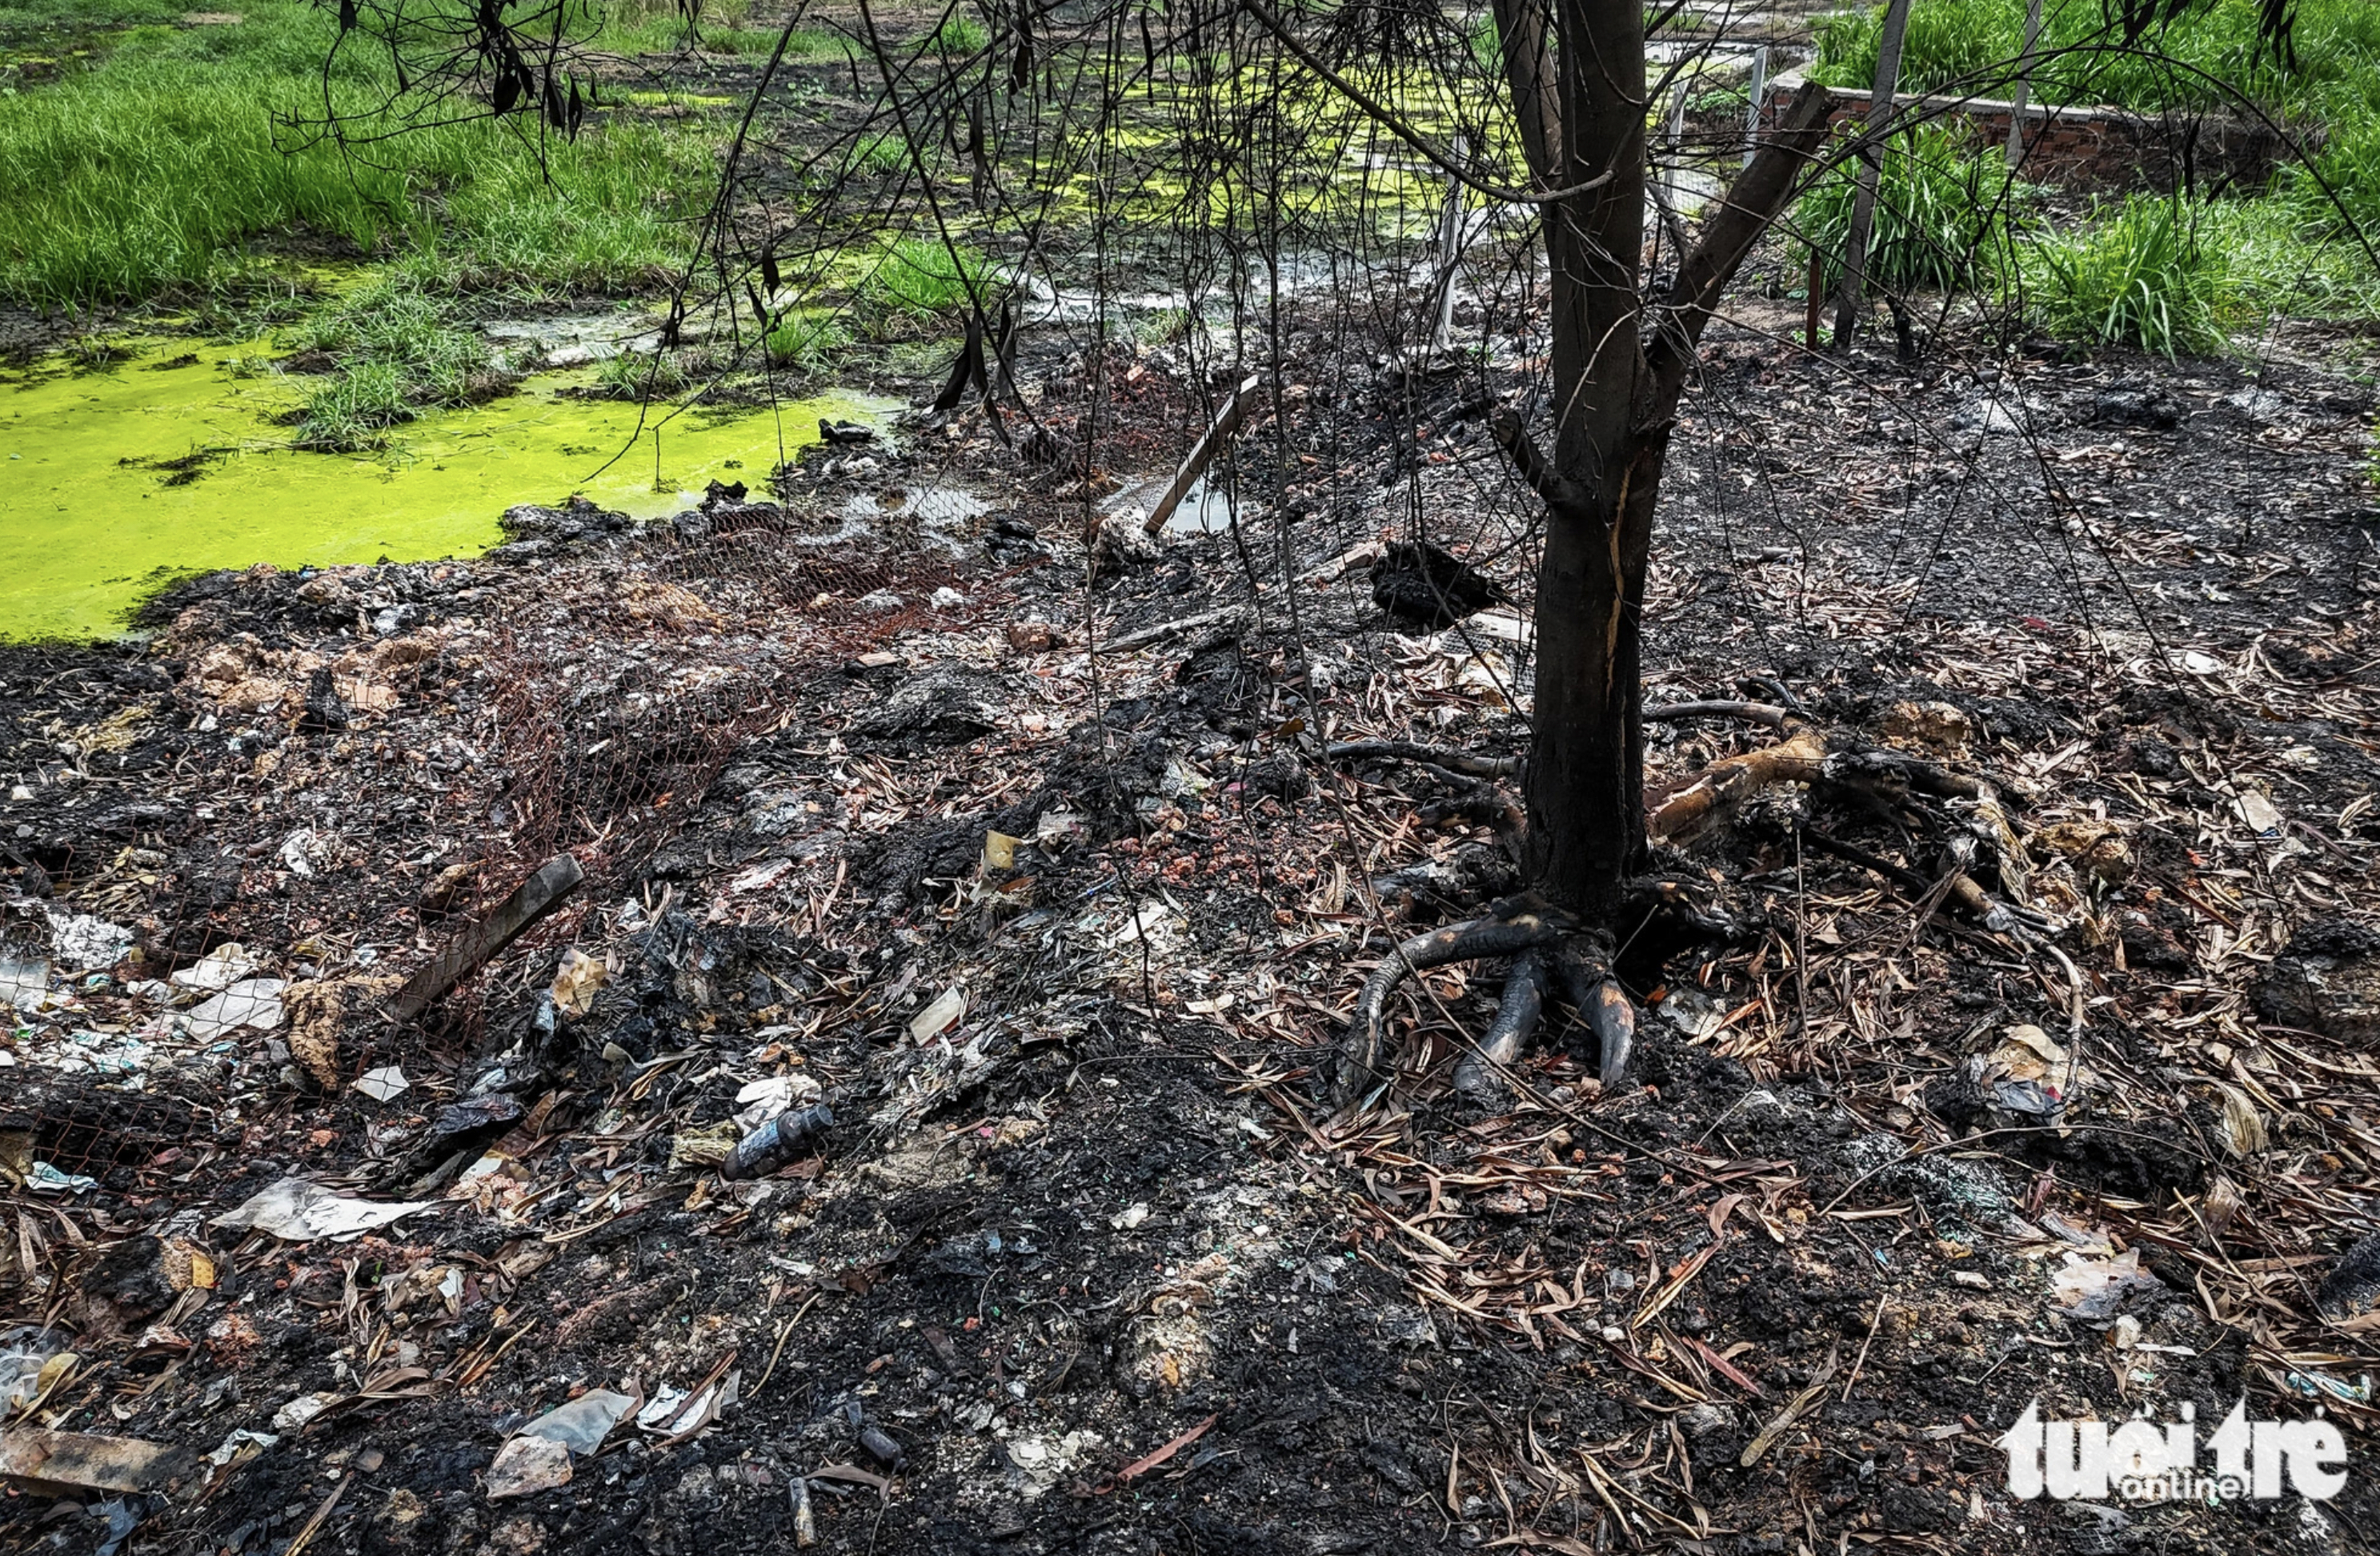 A tree in the dumpsite is pictured being charred. Photo: Ngoc Khai / Tuoi Tre